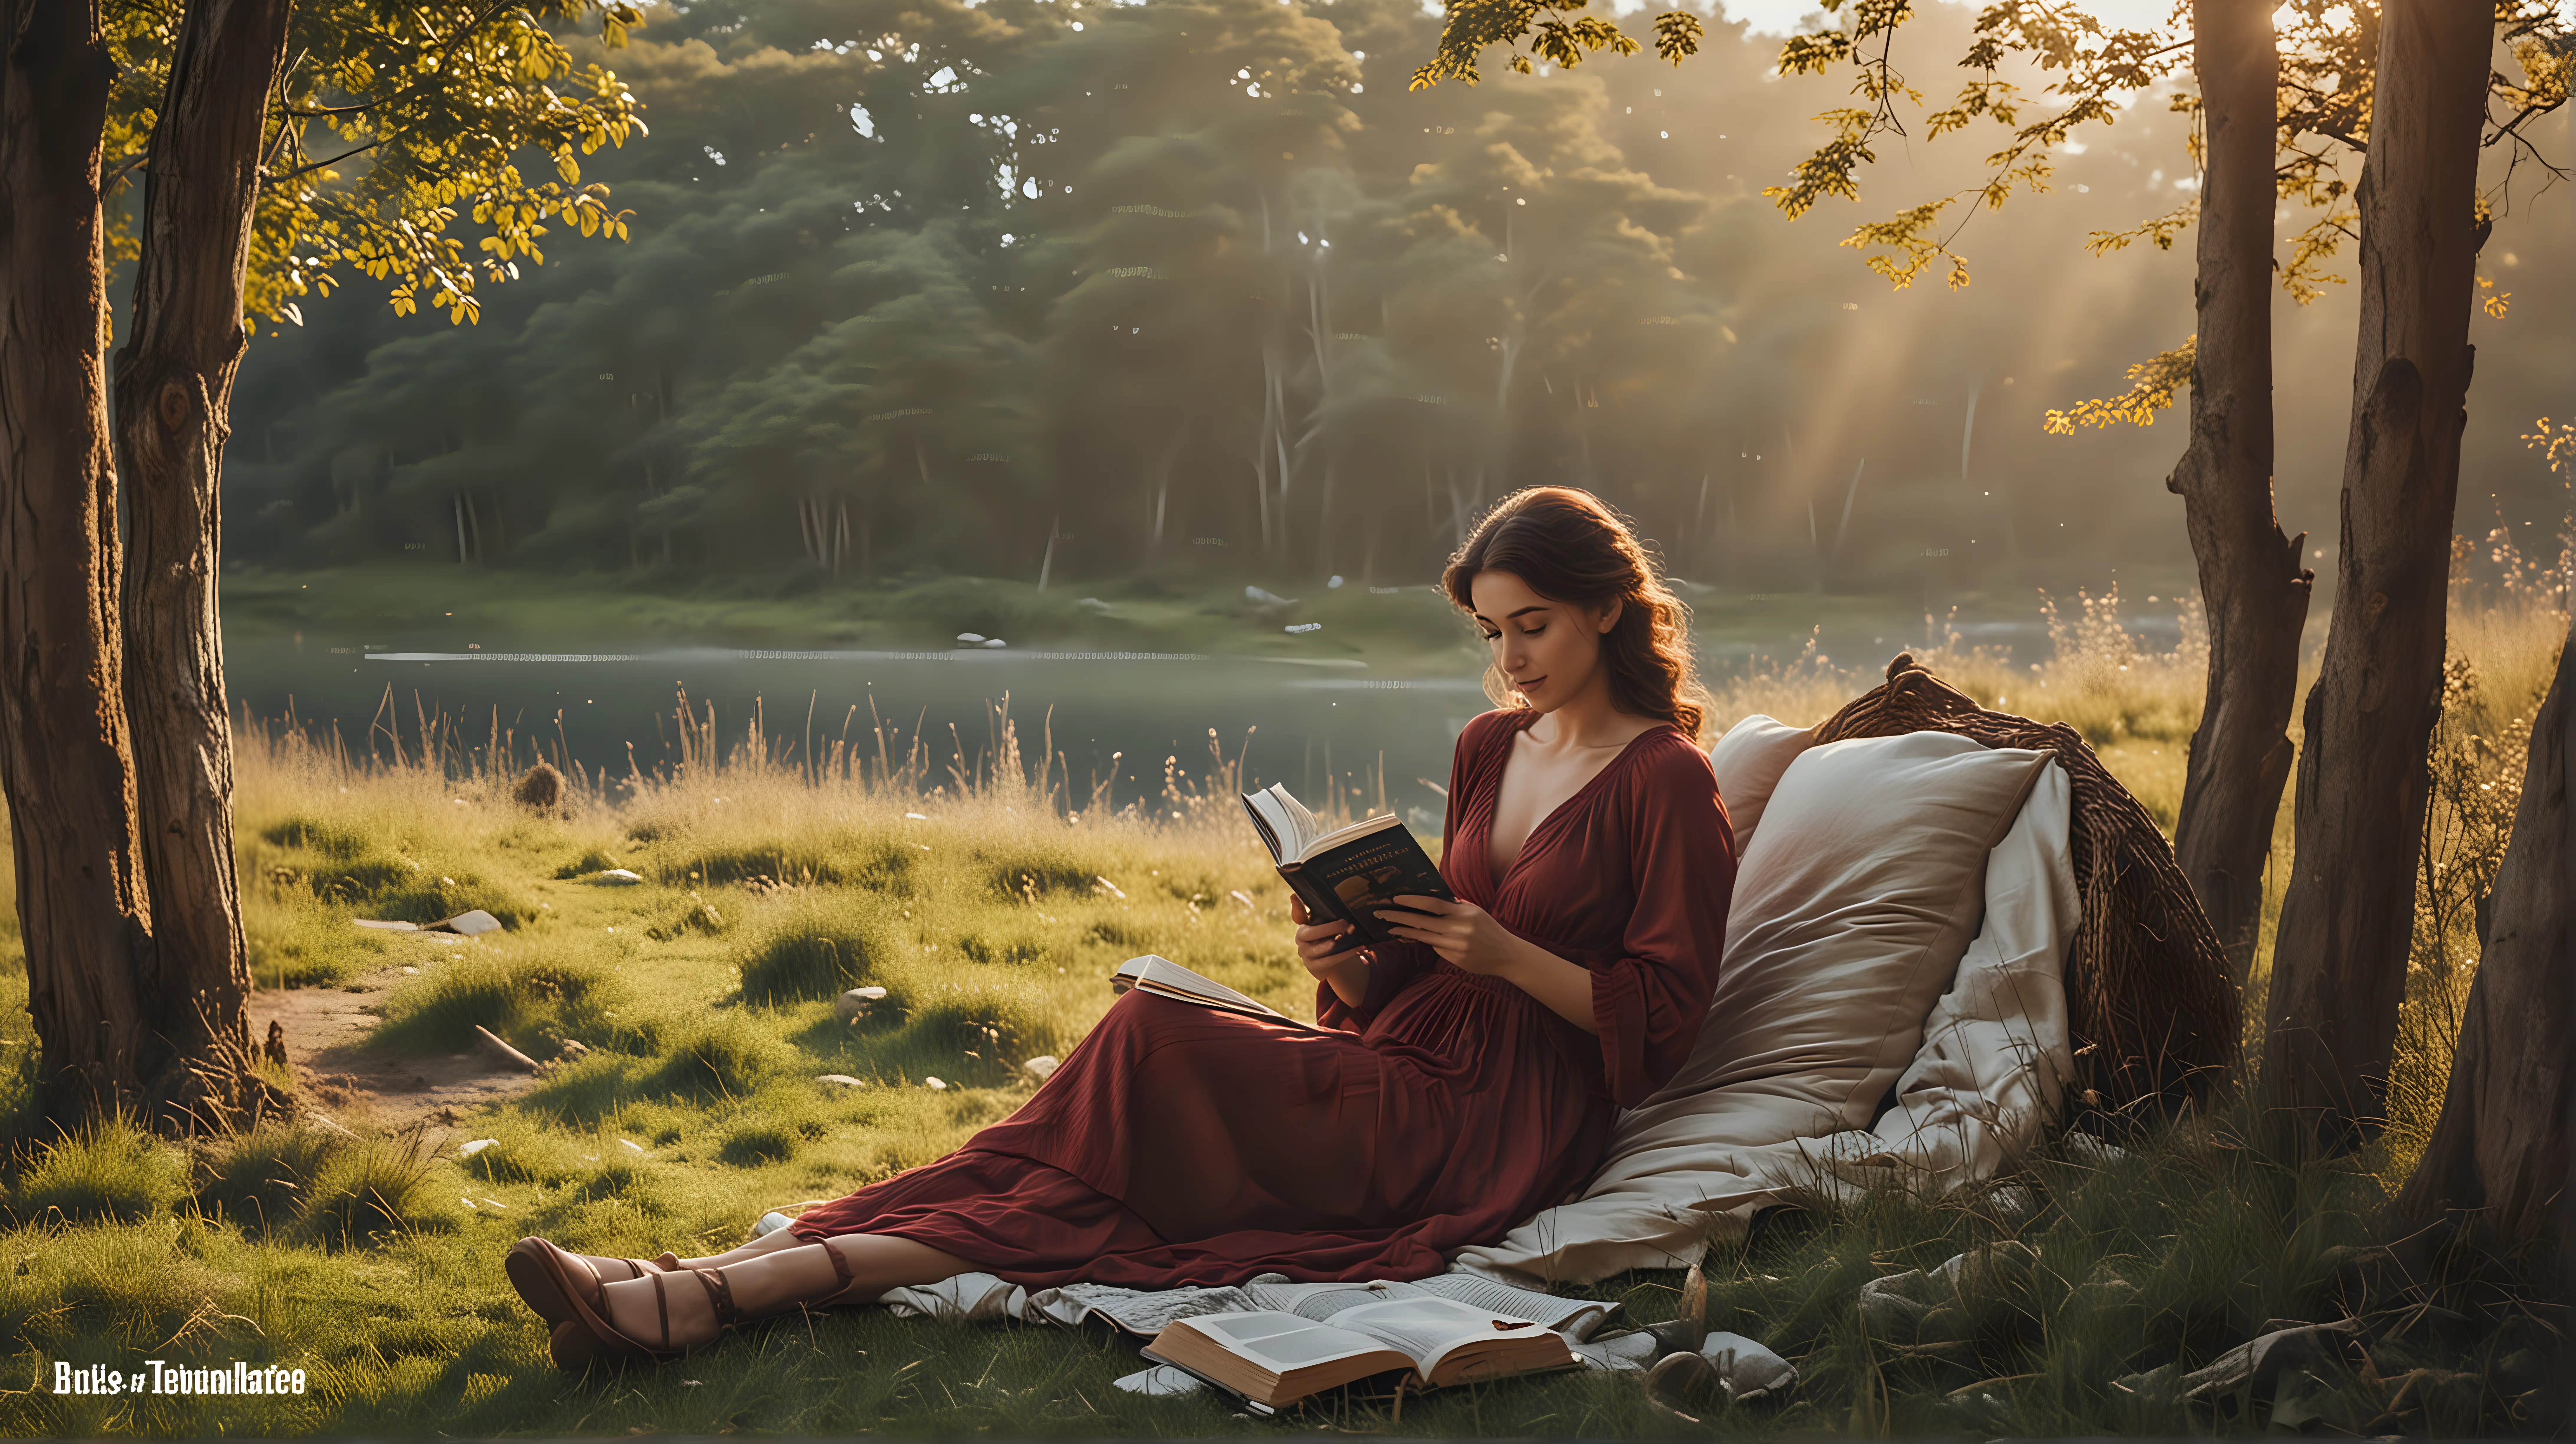 Serene Woman Reading Book in Scenic Setting YouTube Banner